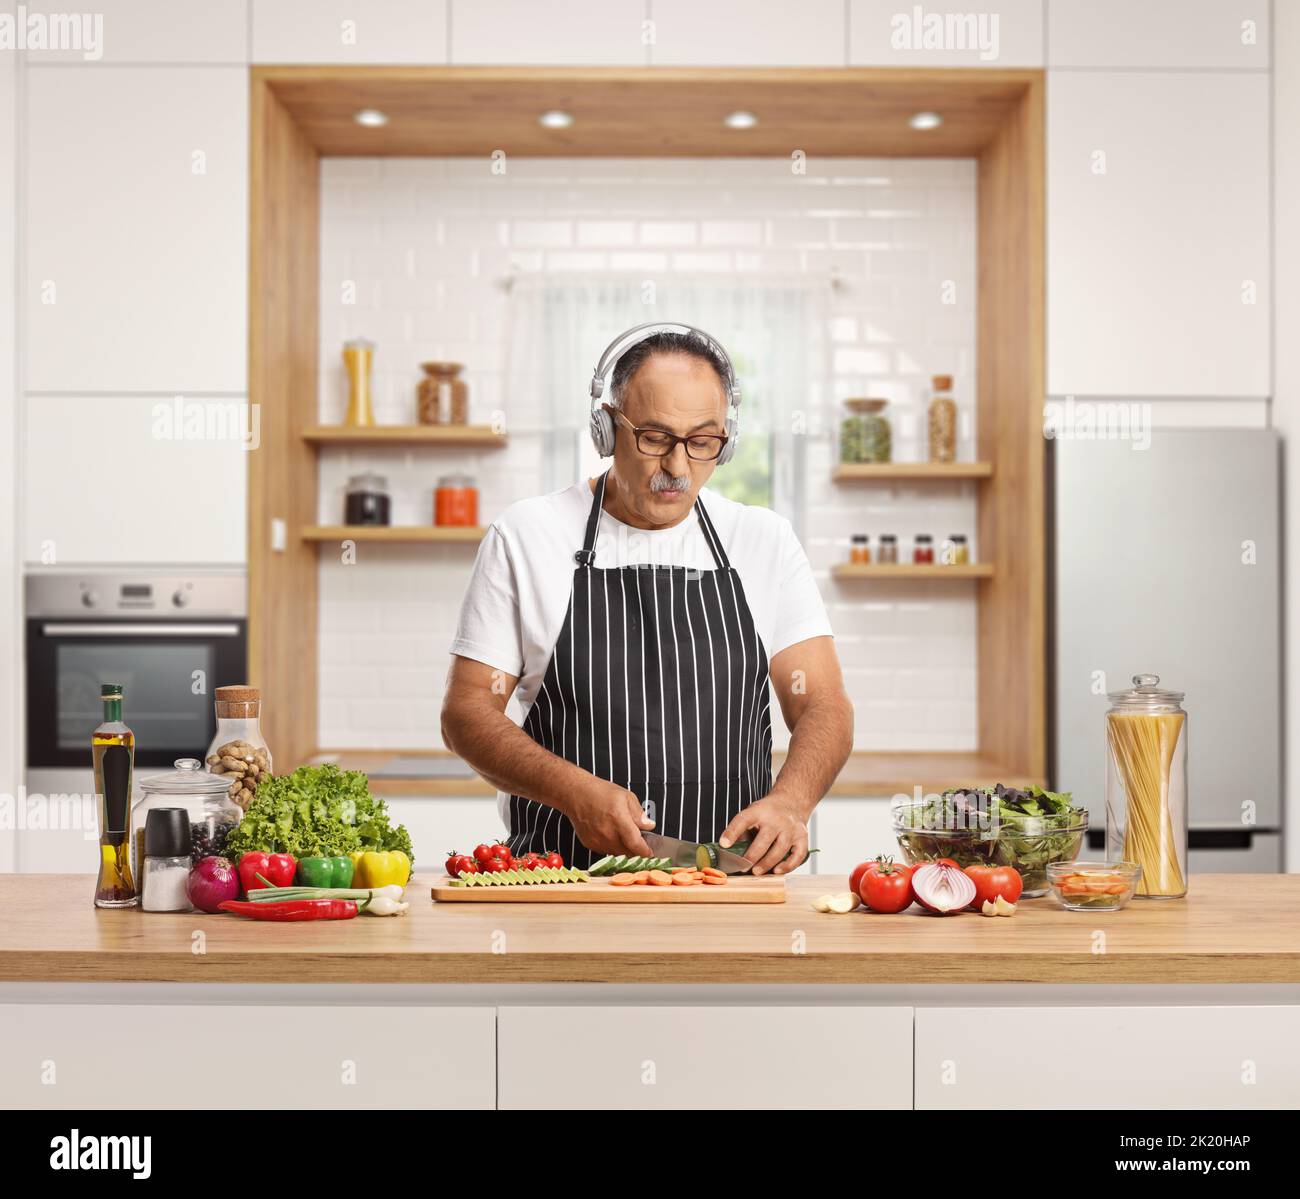 Mature man cutting vegetables on a wooden counter and listening to music with headphones inside a kitchen Stock Photo